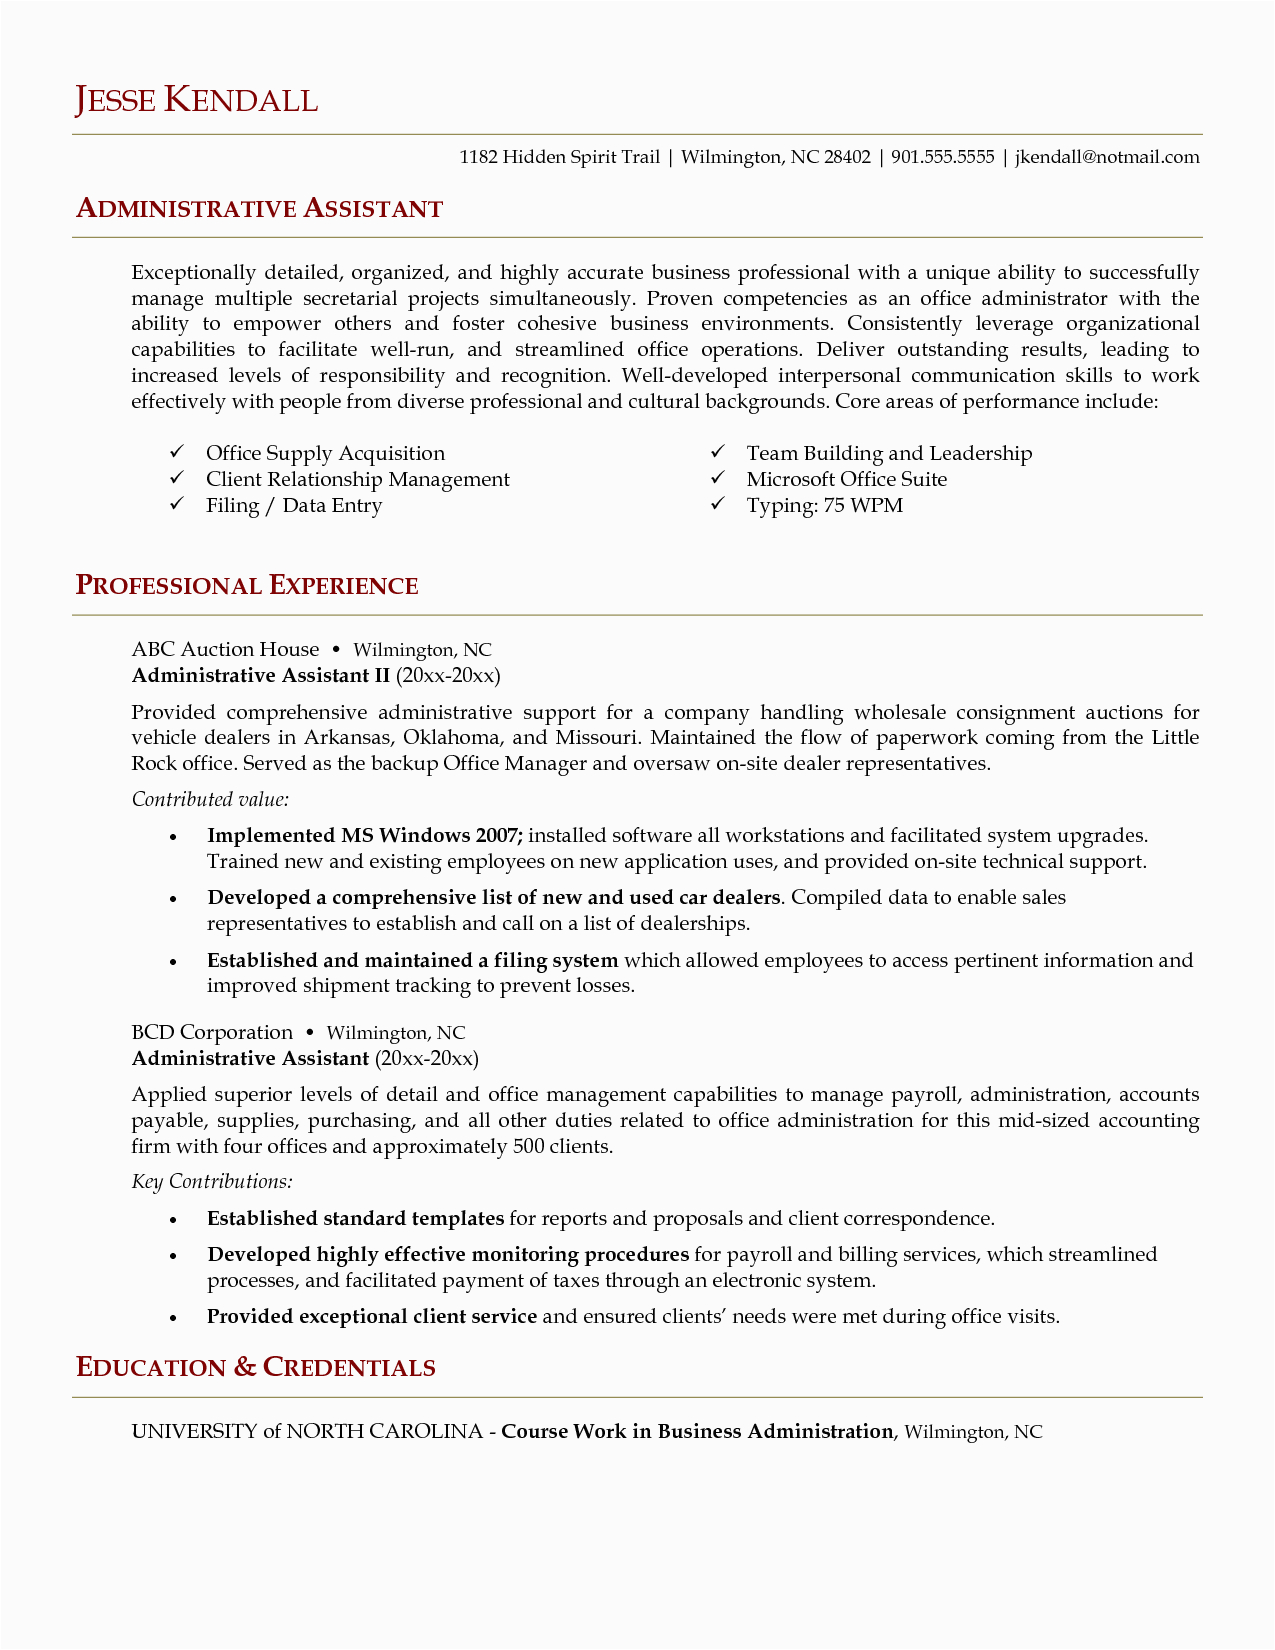 Resume Objective Samples for Administrative assistant Administrative assistant Resume